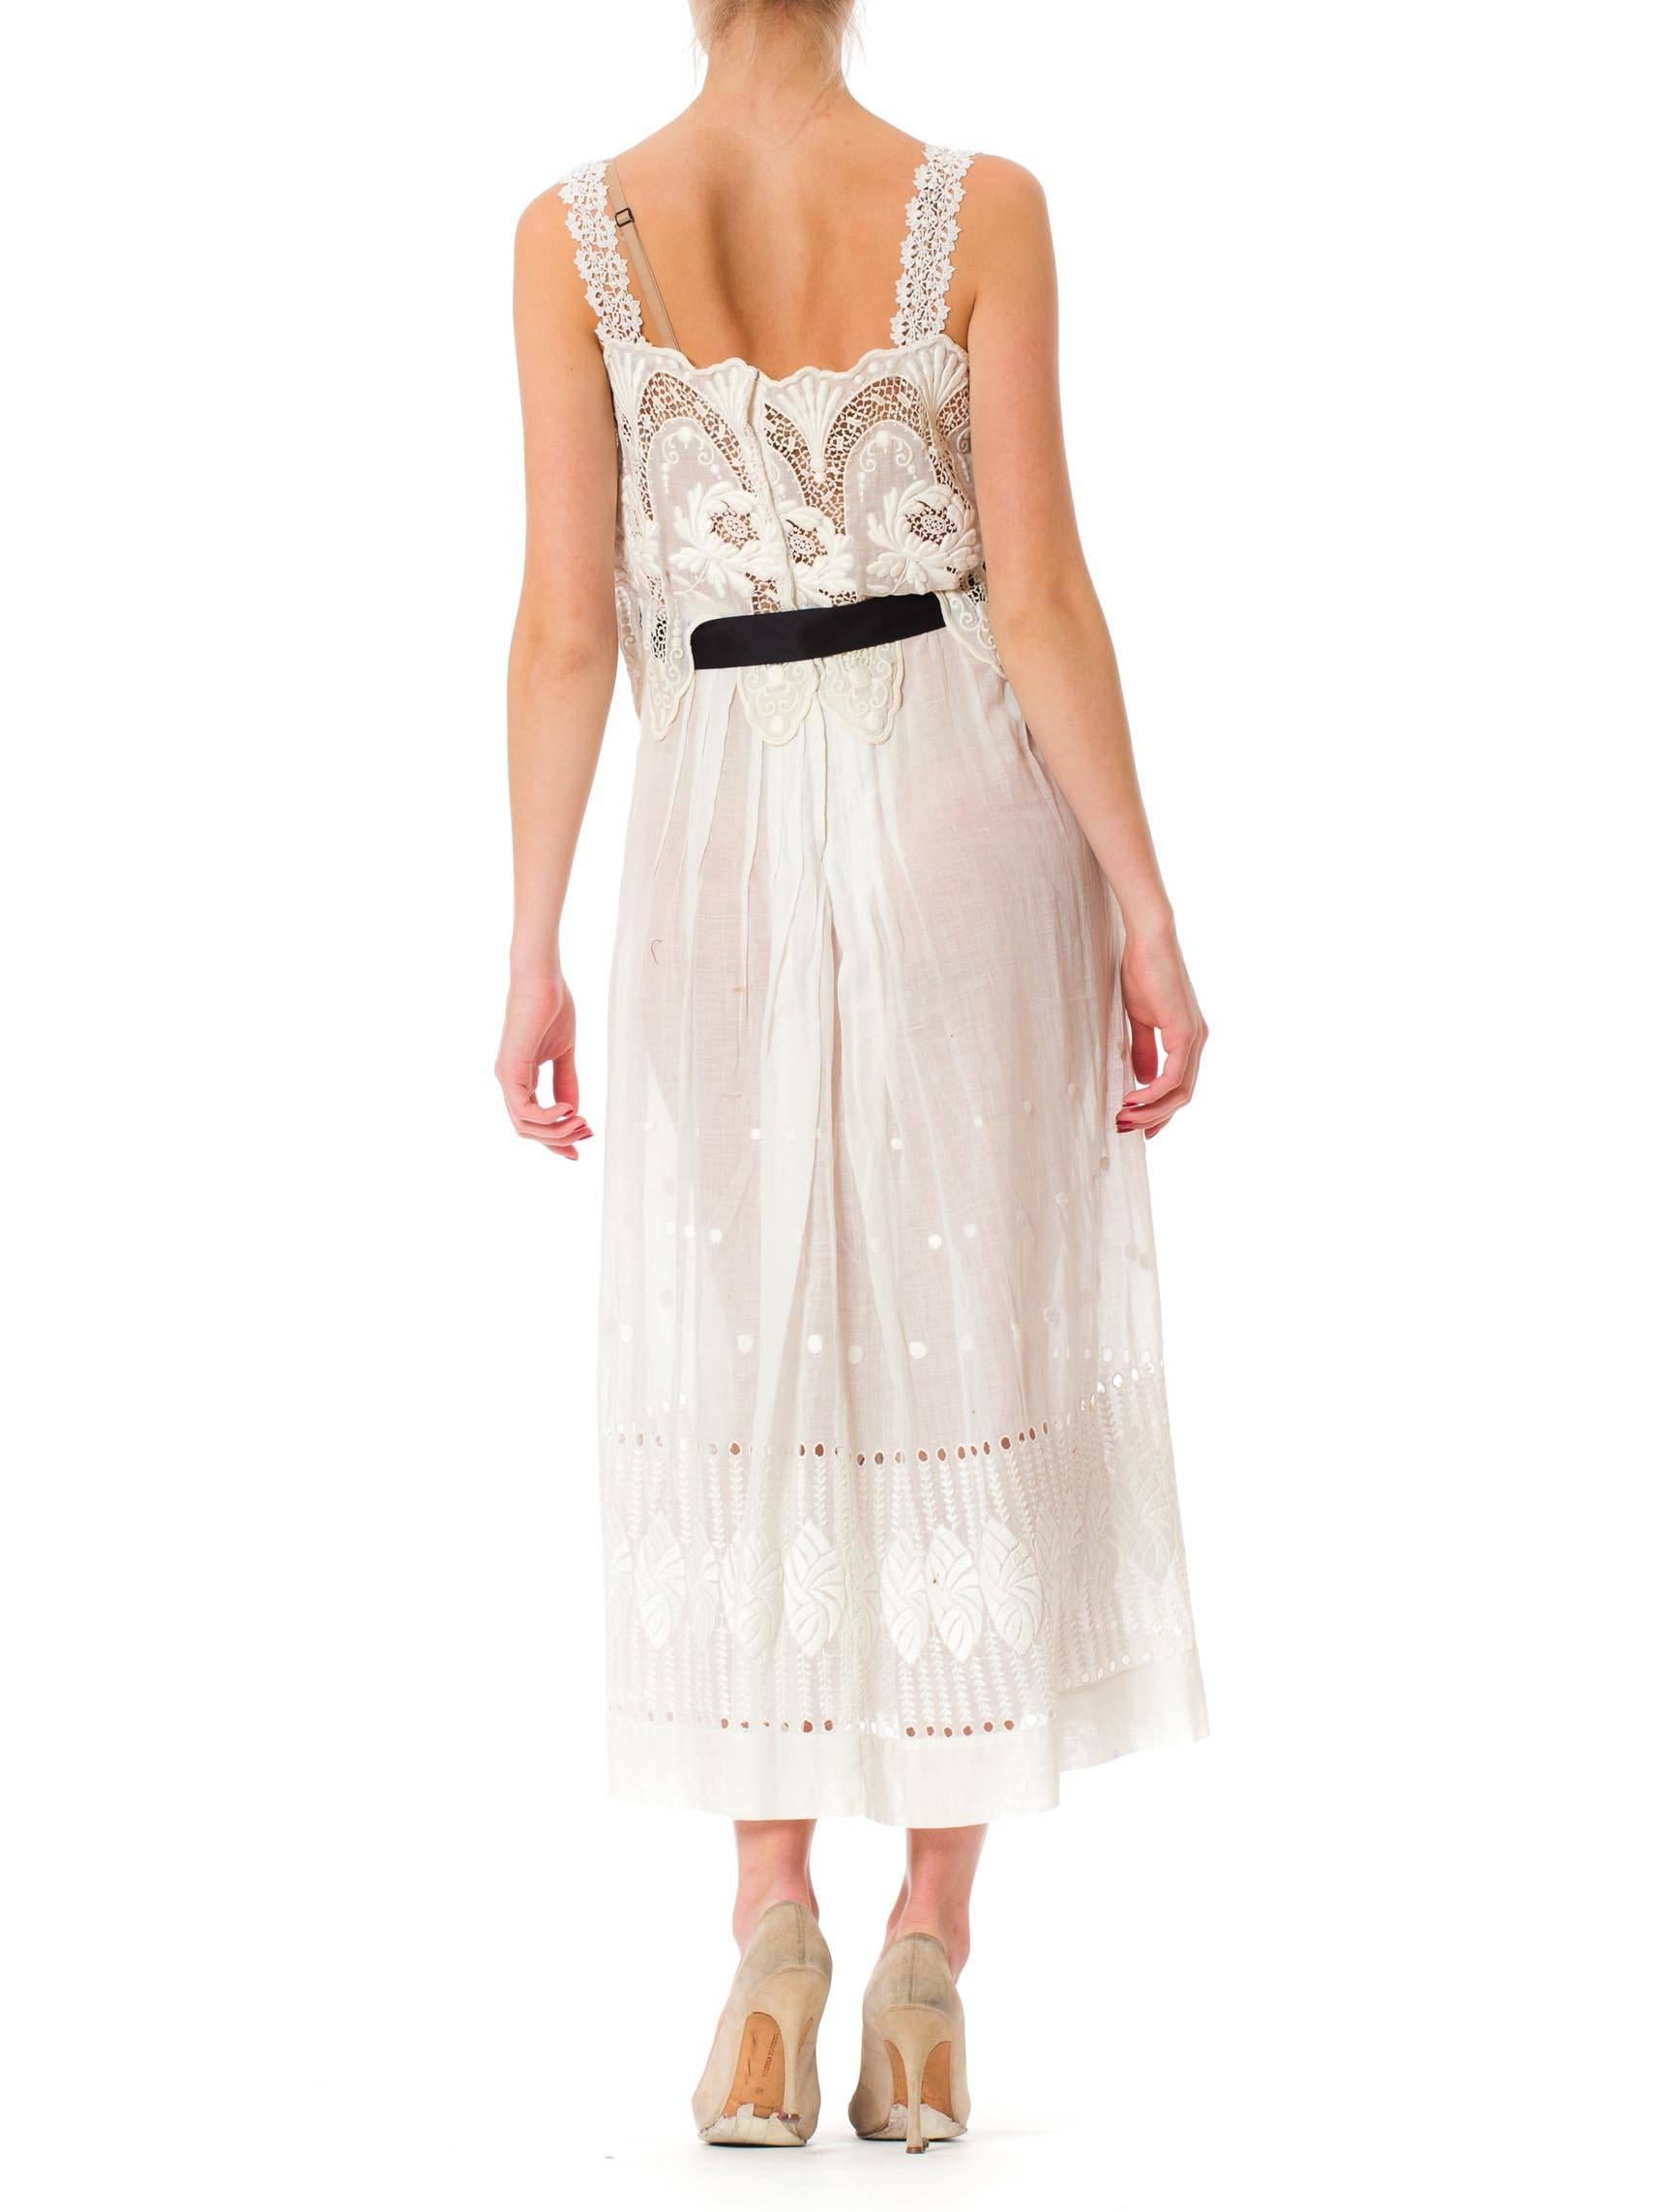 MORPHEW COLLECTION White Victorian Cotton Voile Dress With Lace Details & Black 1